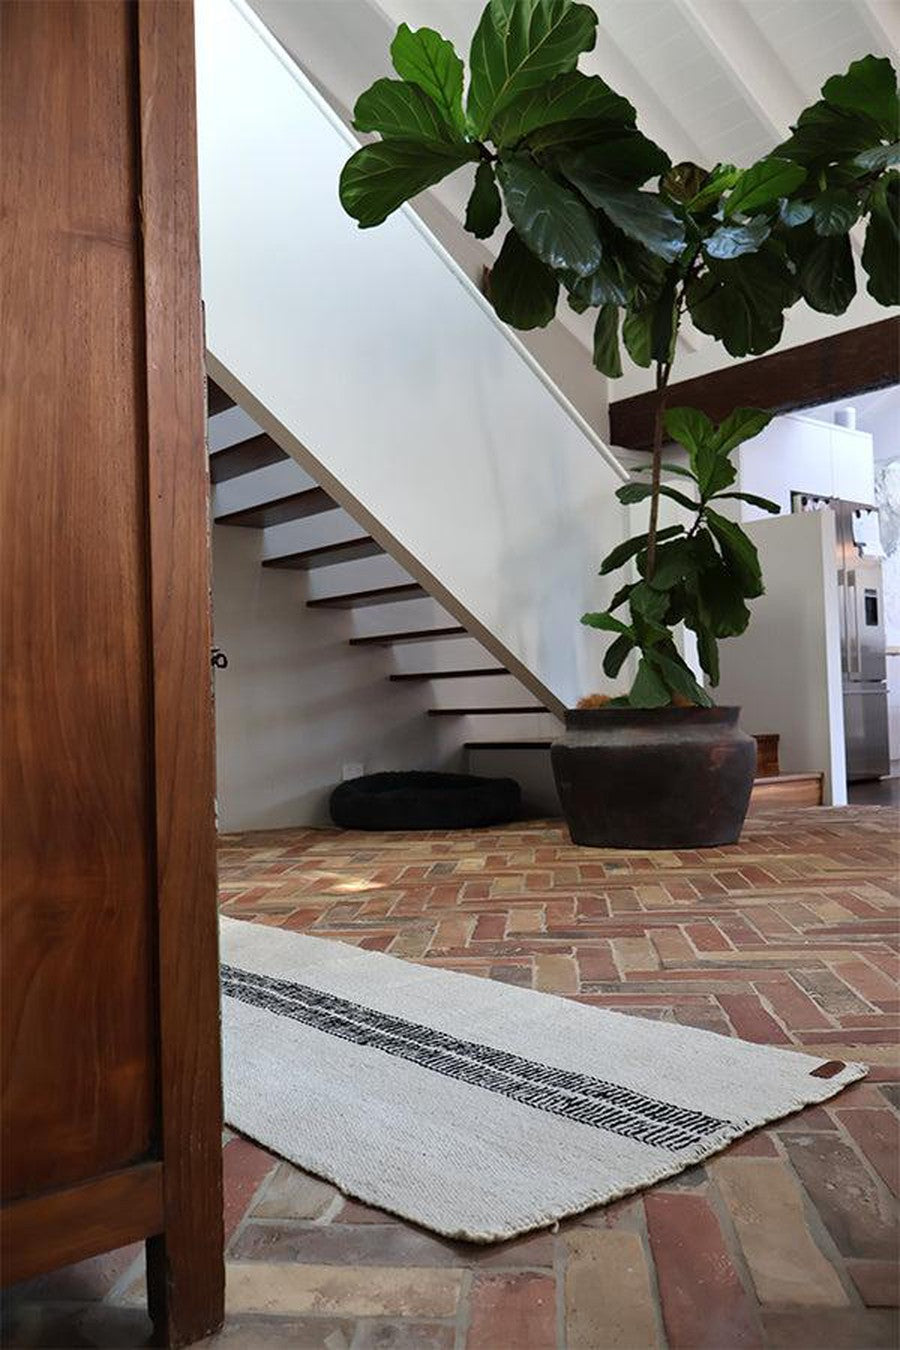 PLENA RUG | RUNNER #3 NATURAL & BLACK-The Andes Project